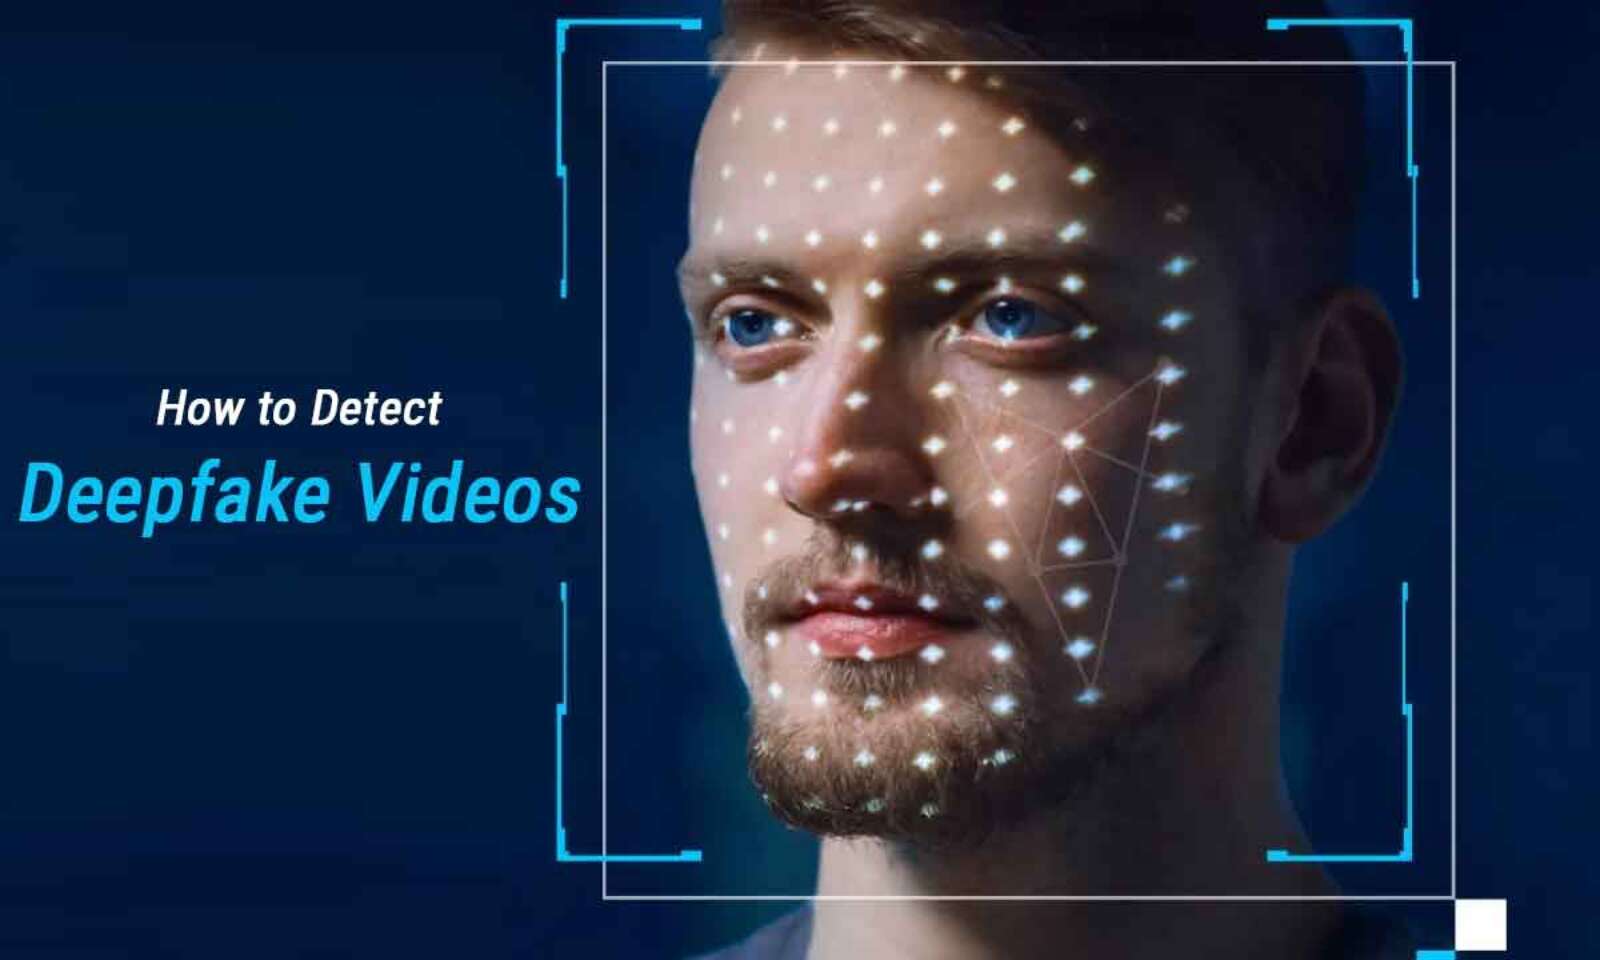 How to Detect Deepfake Videos